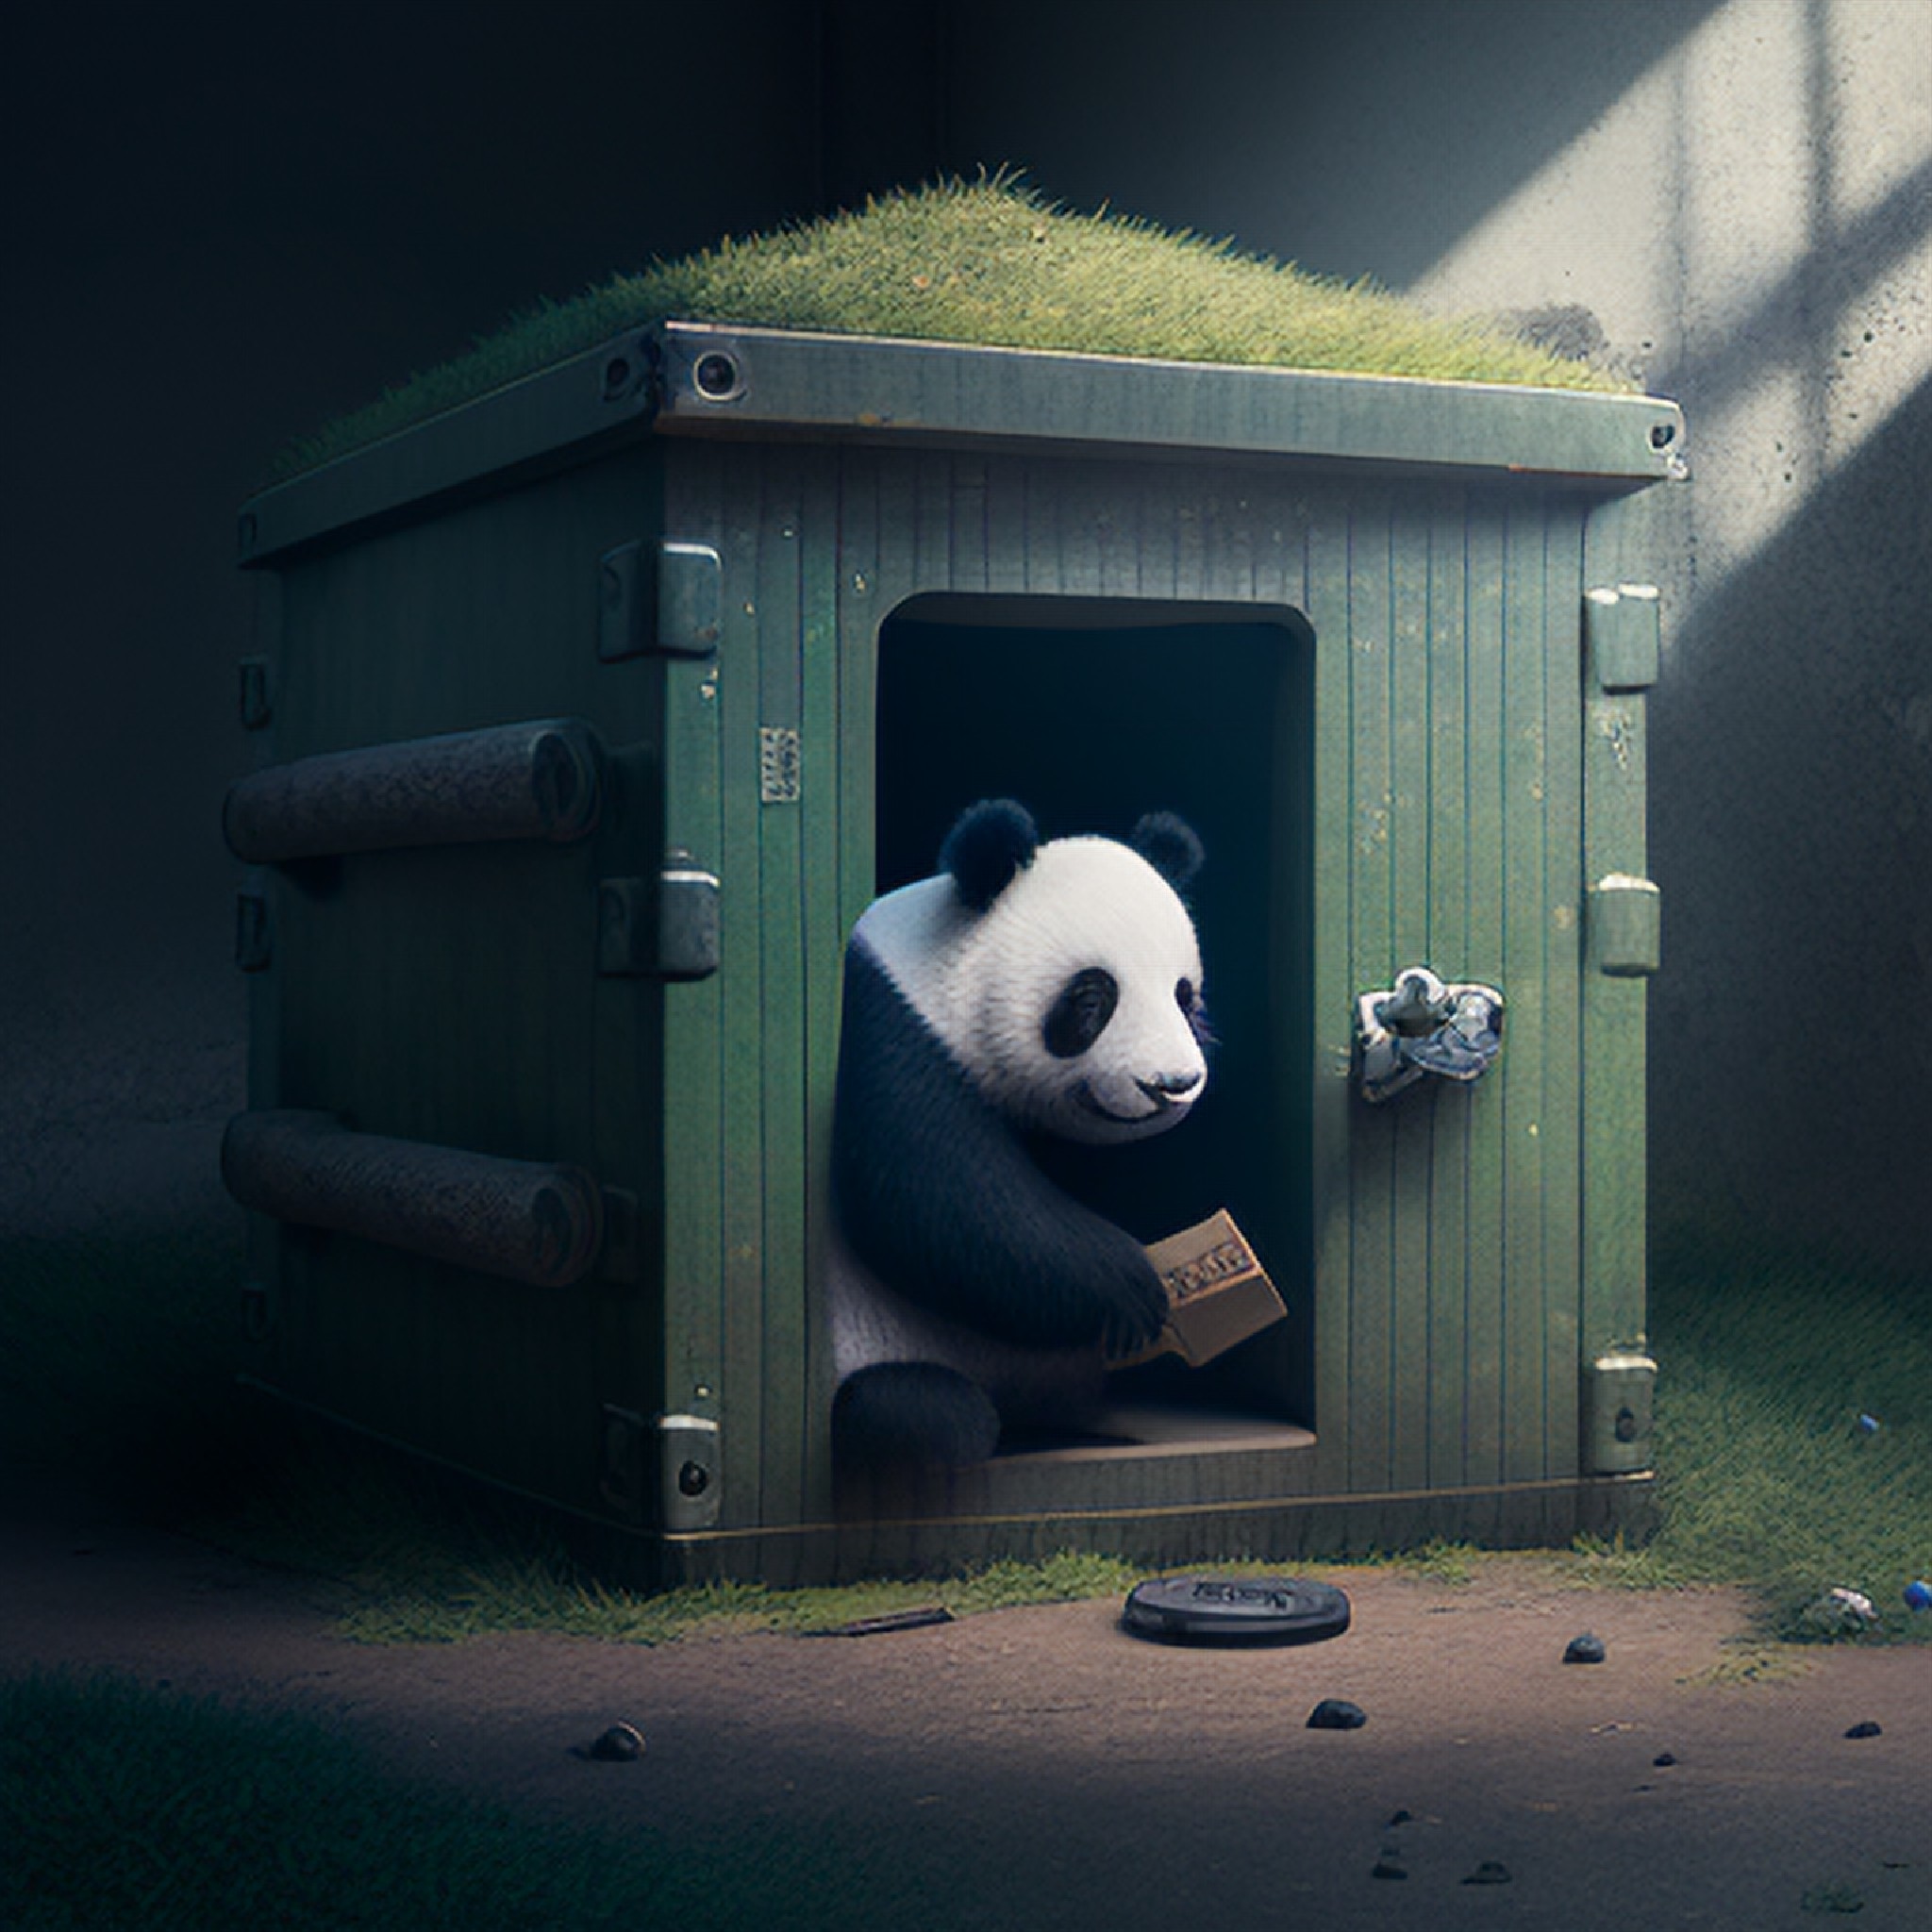 A panda is building a kennel